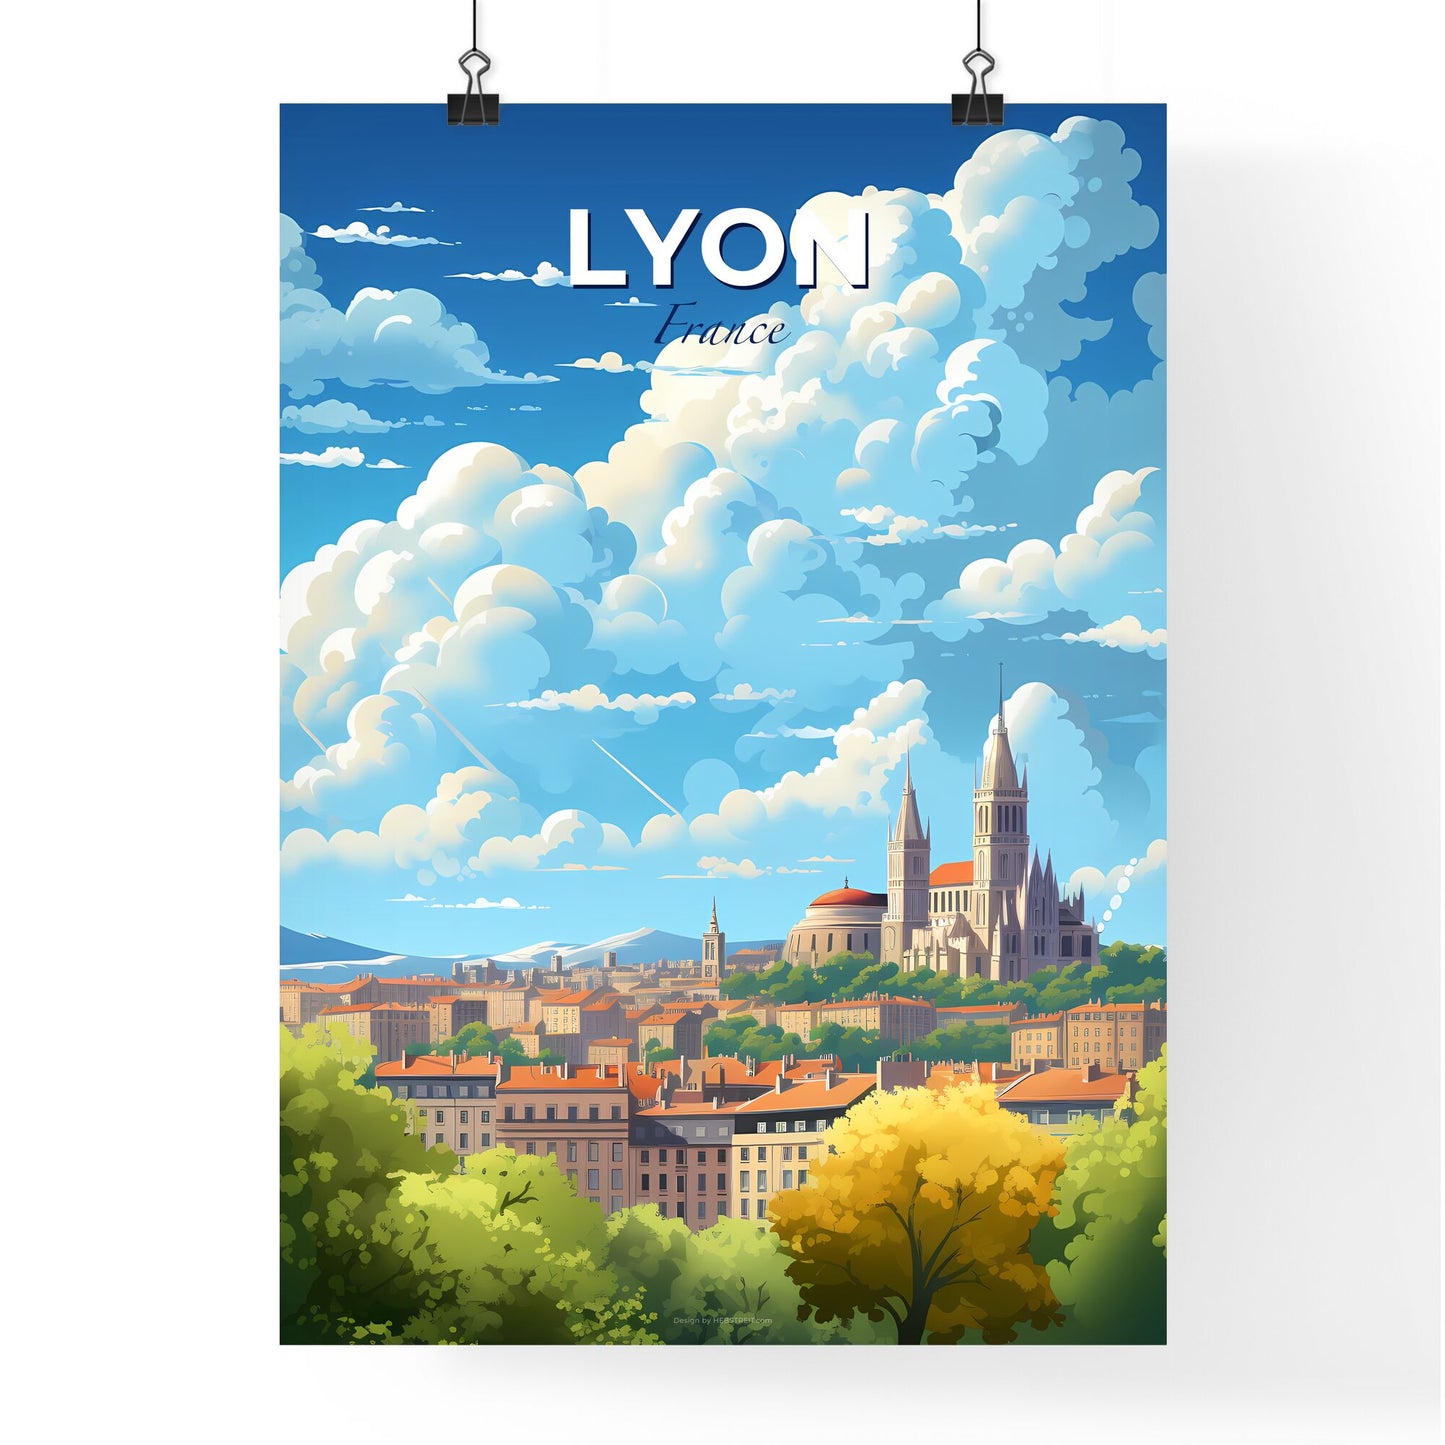 Lyon France Skyline - A City Landscape With A Castle And Trees - Customizable Travel Gift Default Title